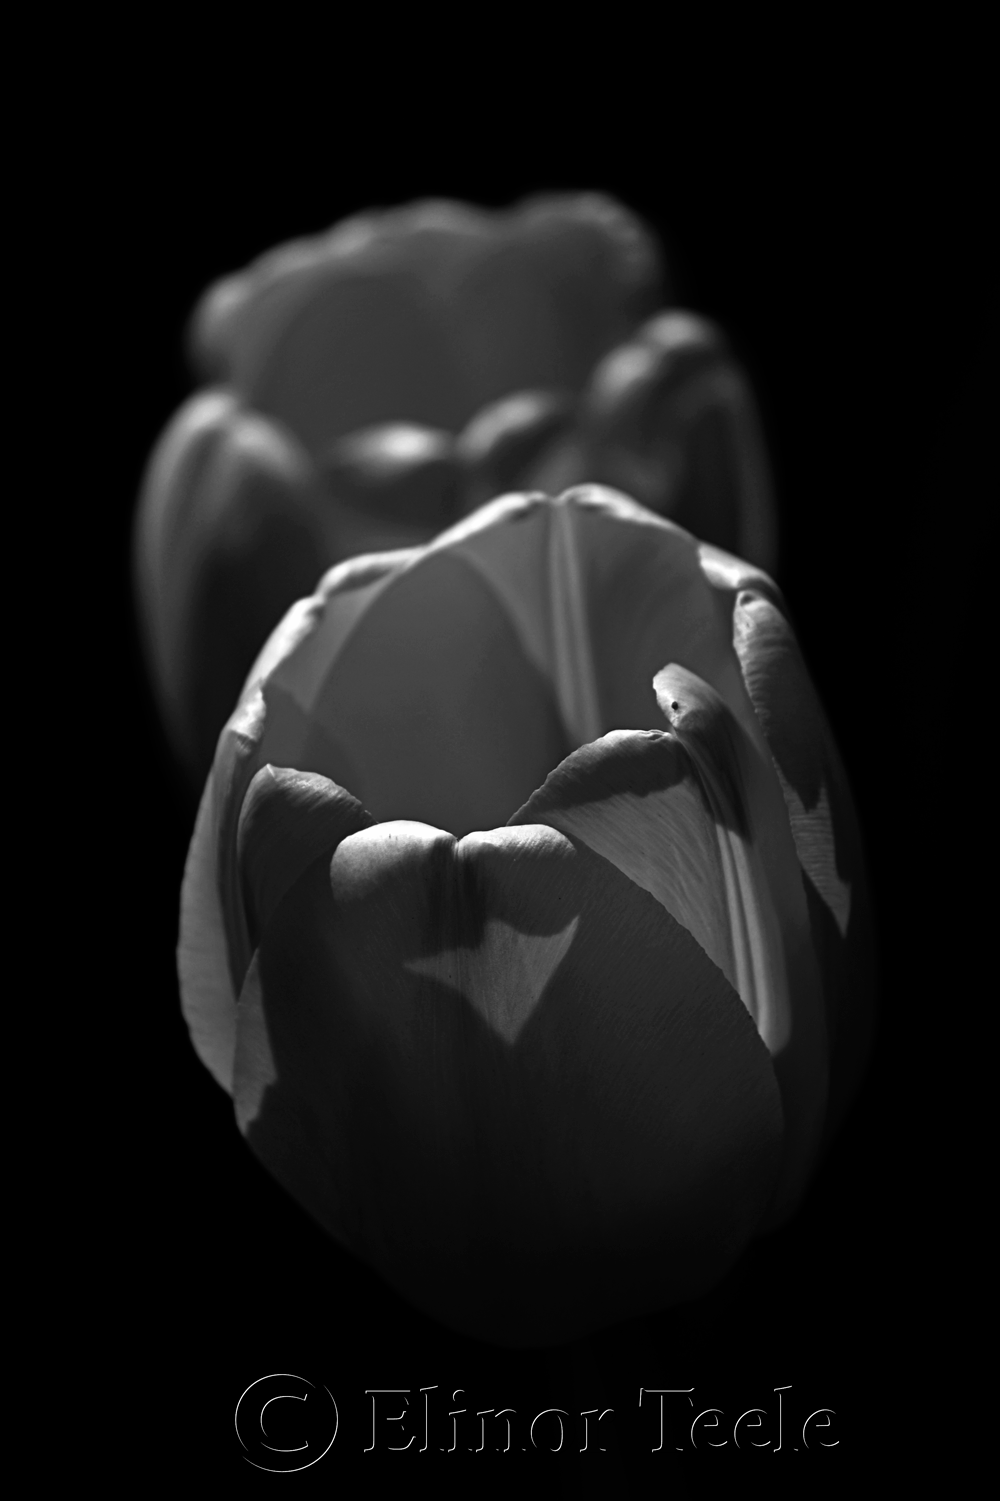 Two Tulips - Black and White